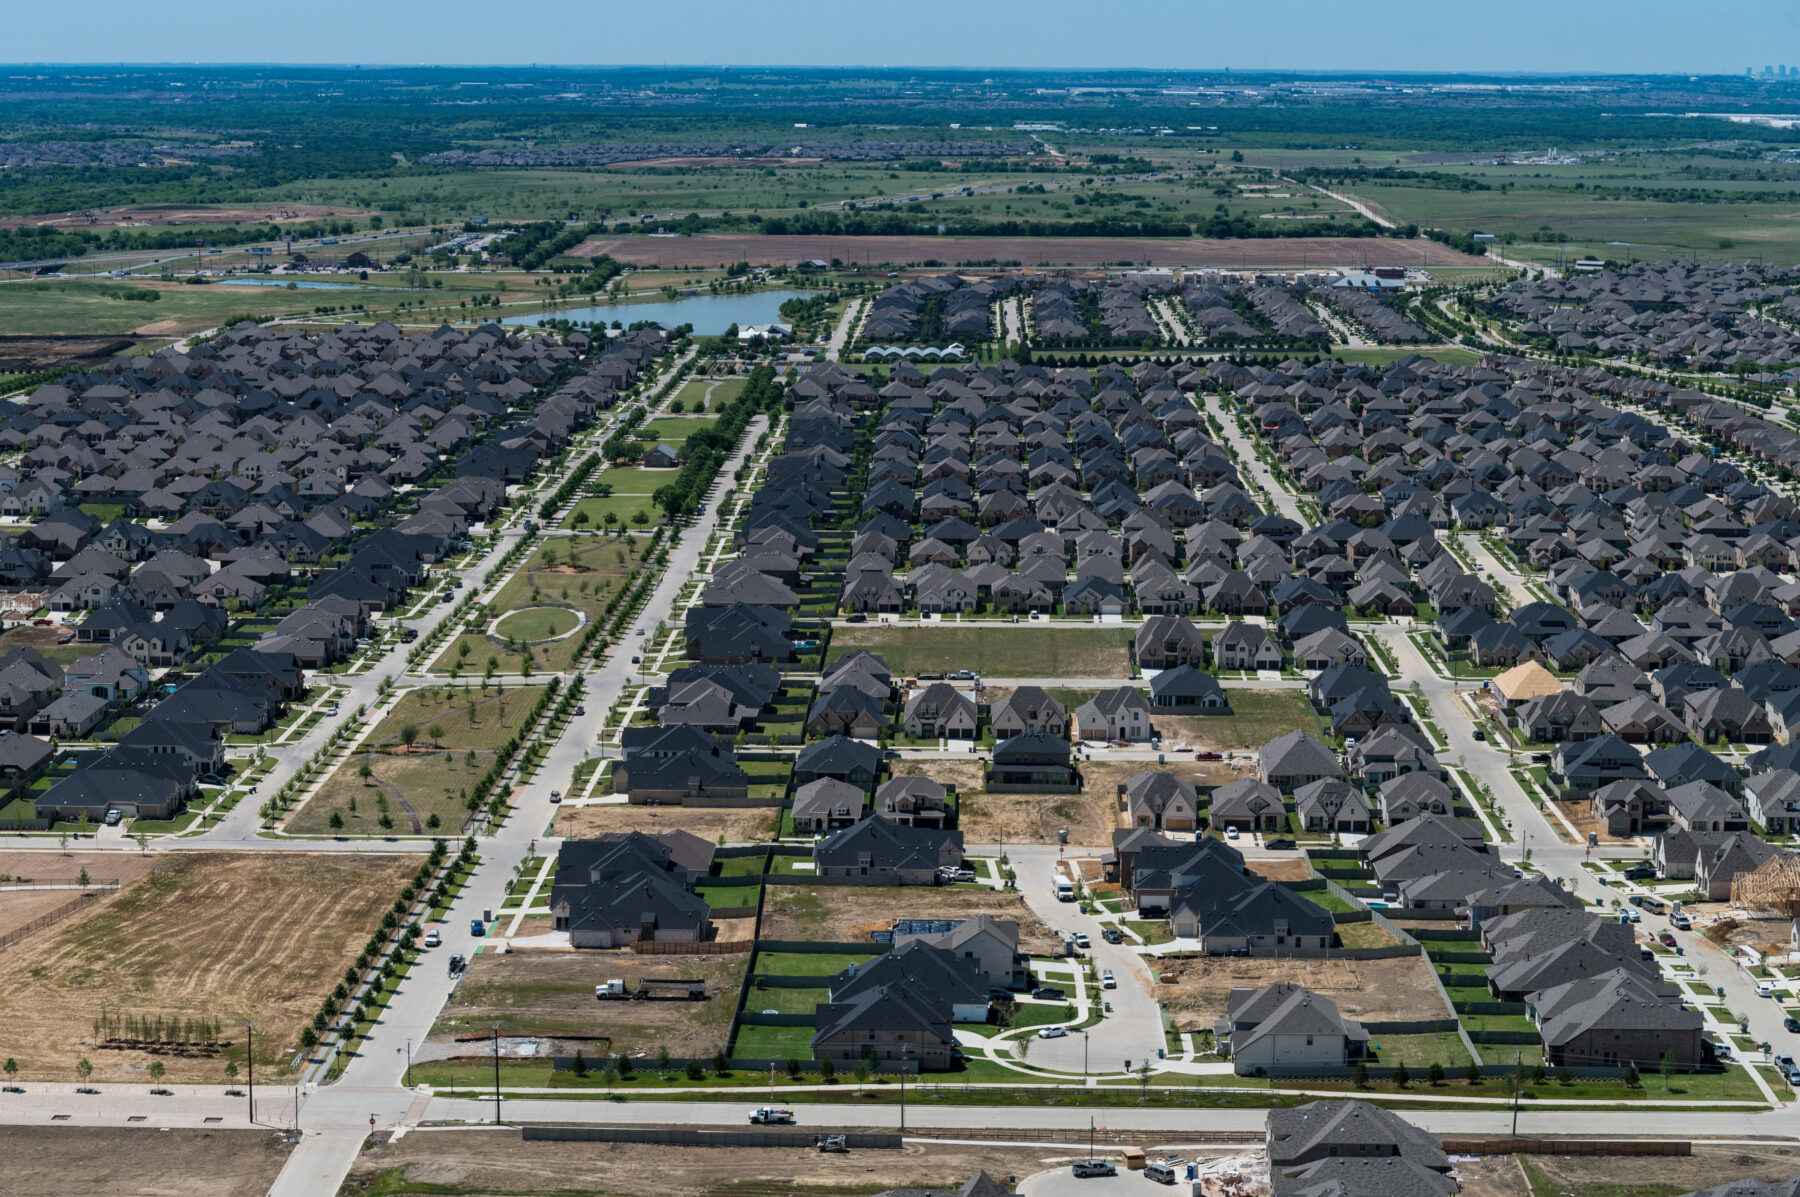 A bird's eye view of the homes, parks and amenities at a Lifestyle by Hillwood community